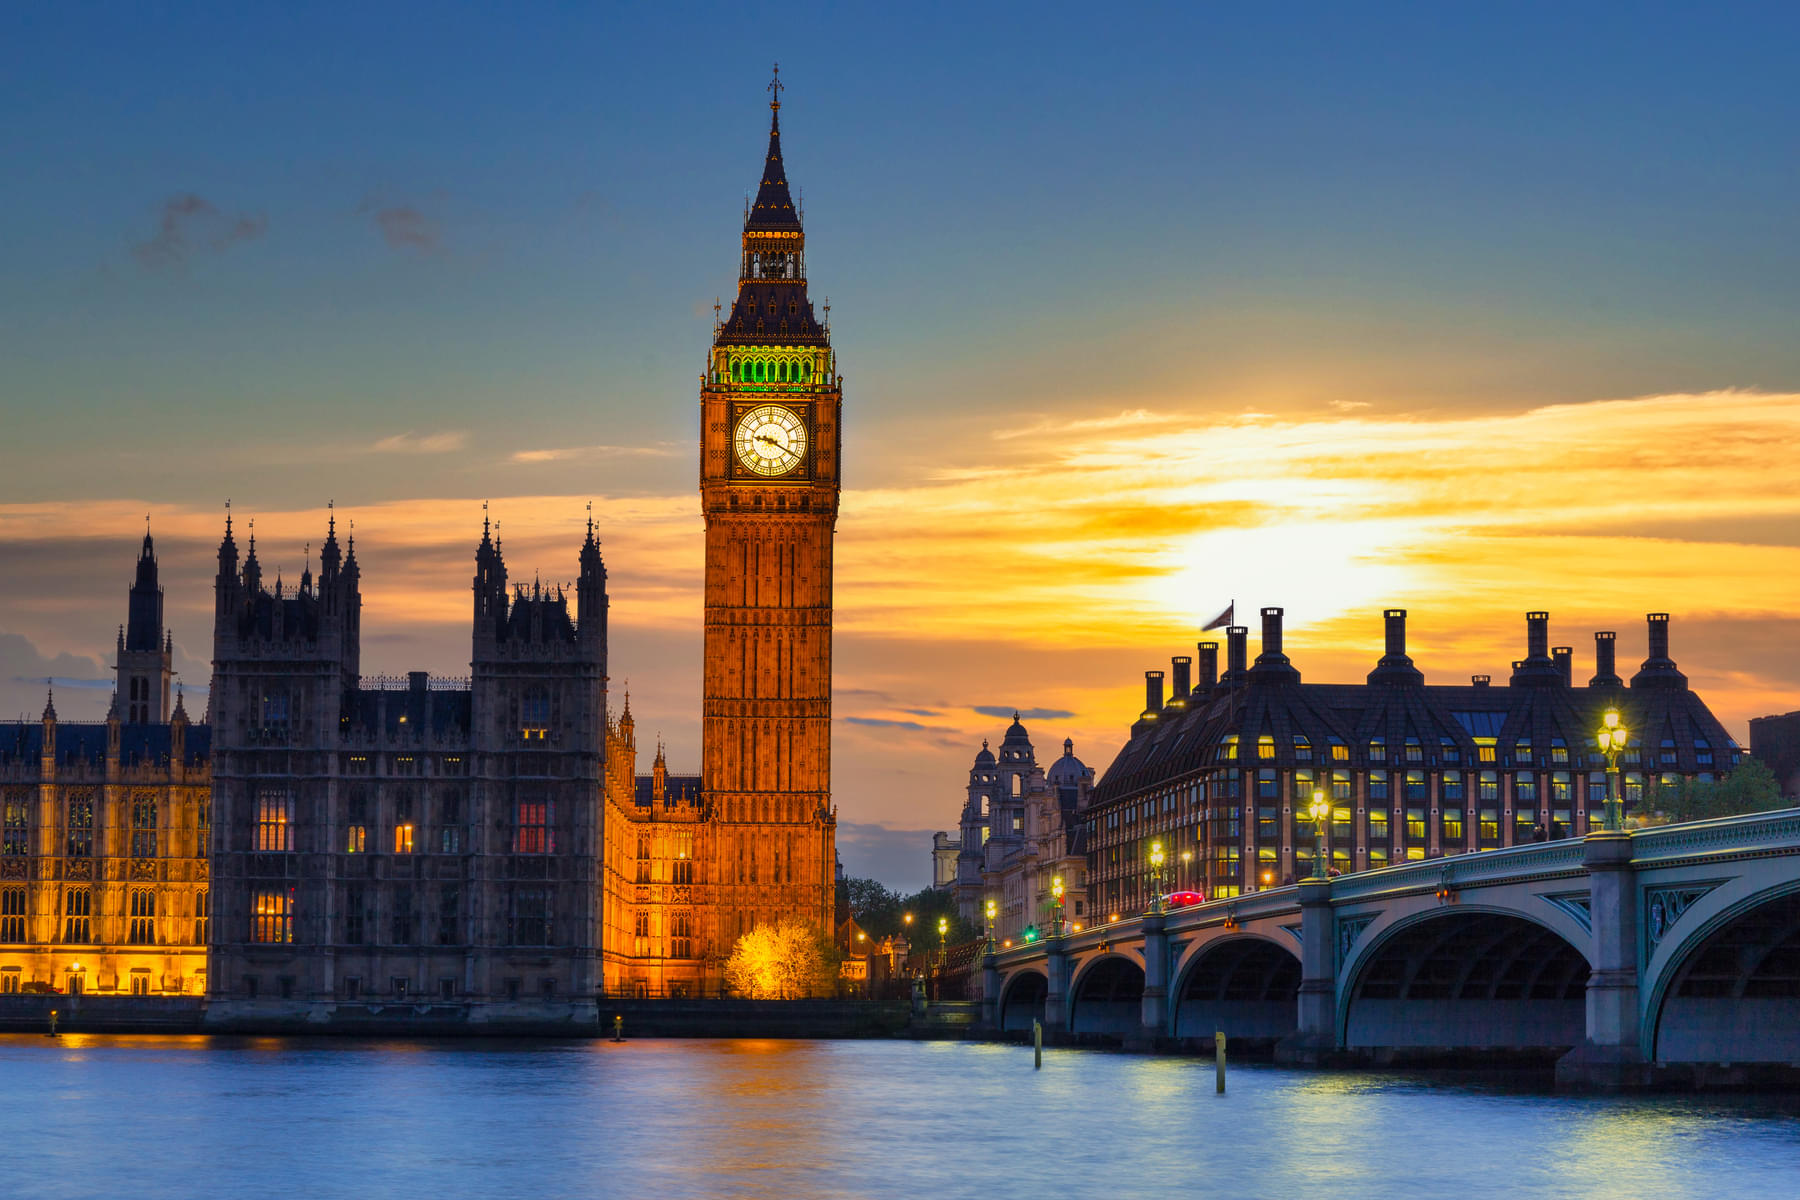 Get scenic views of sunset with iconic Big Ben